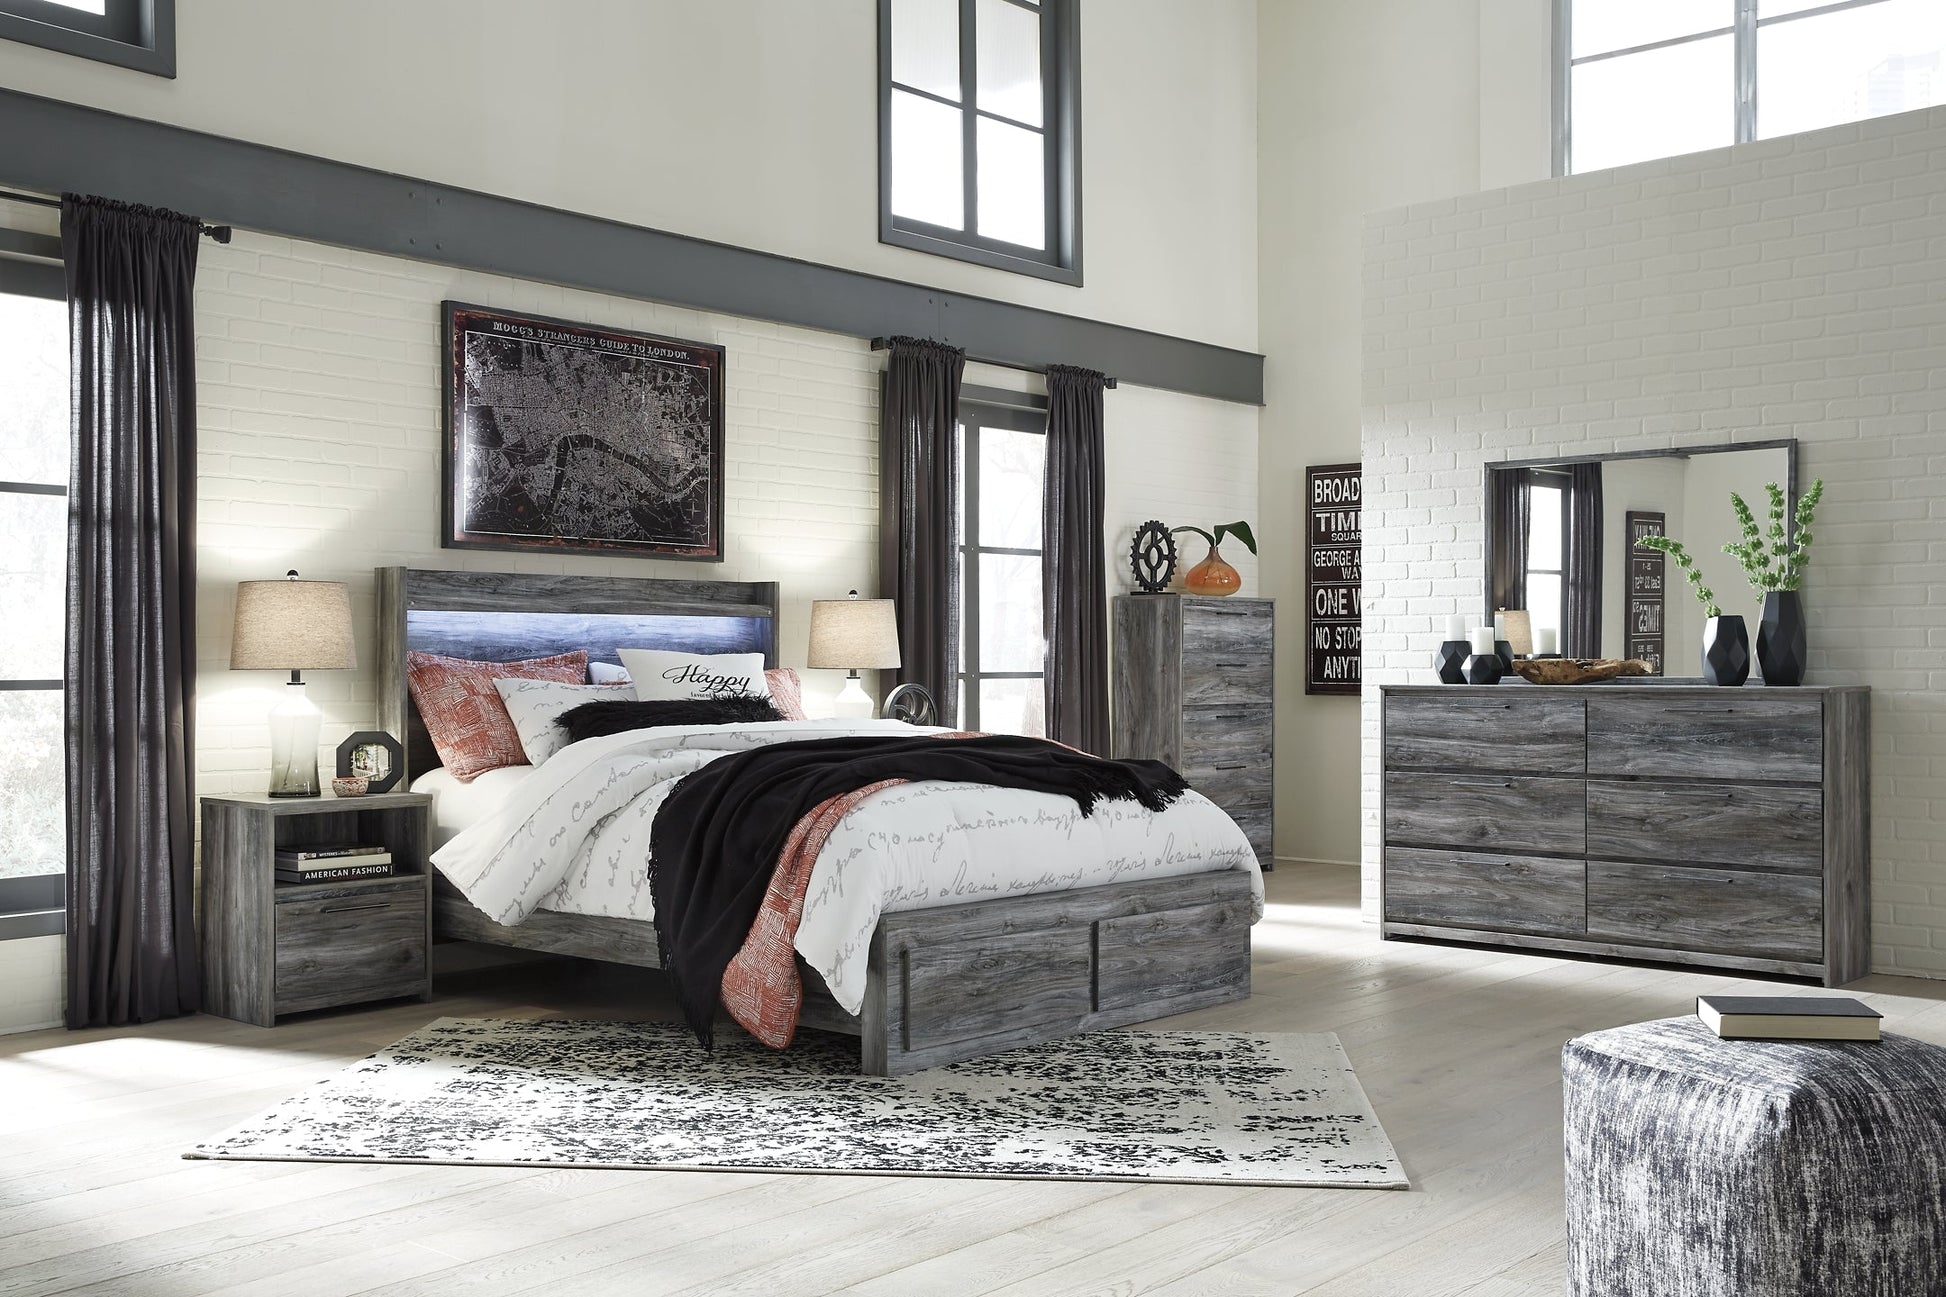 Baystorm One Drawer Night Stand at Walker Mattress and Furniture